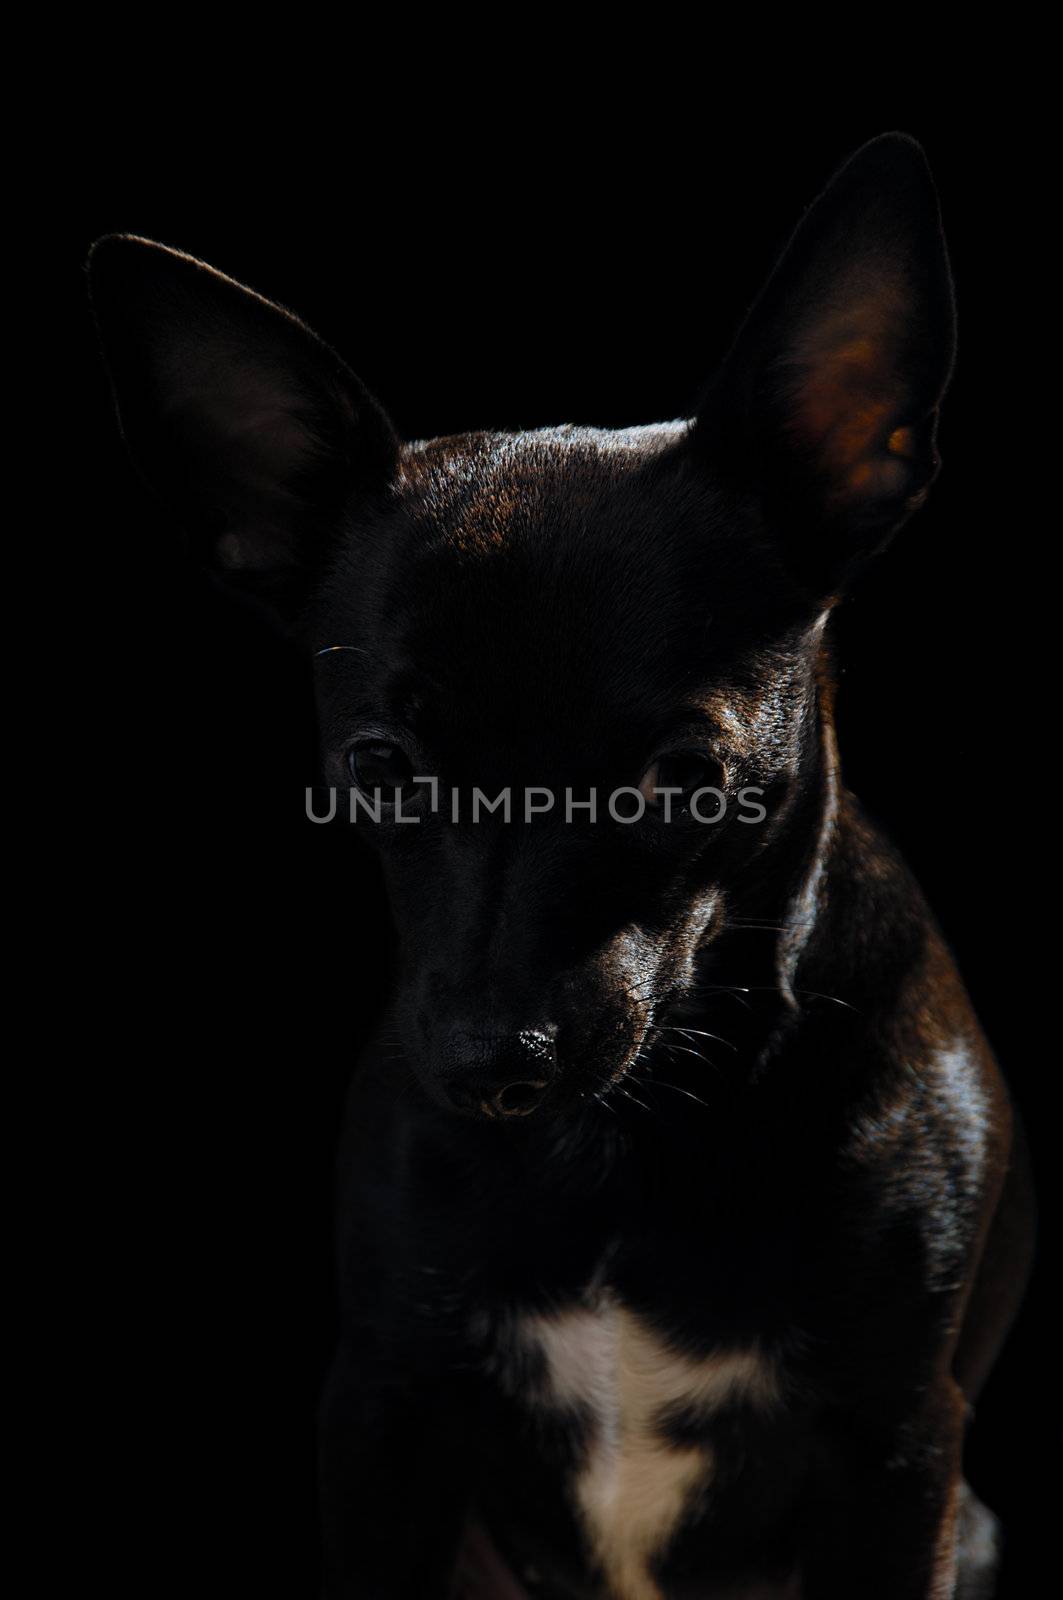 Sweet shy puppy dog on a black background. Mix of a miniature pincher and a chihuahua.